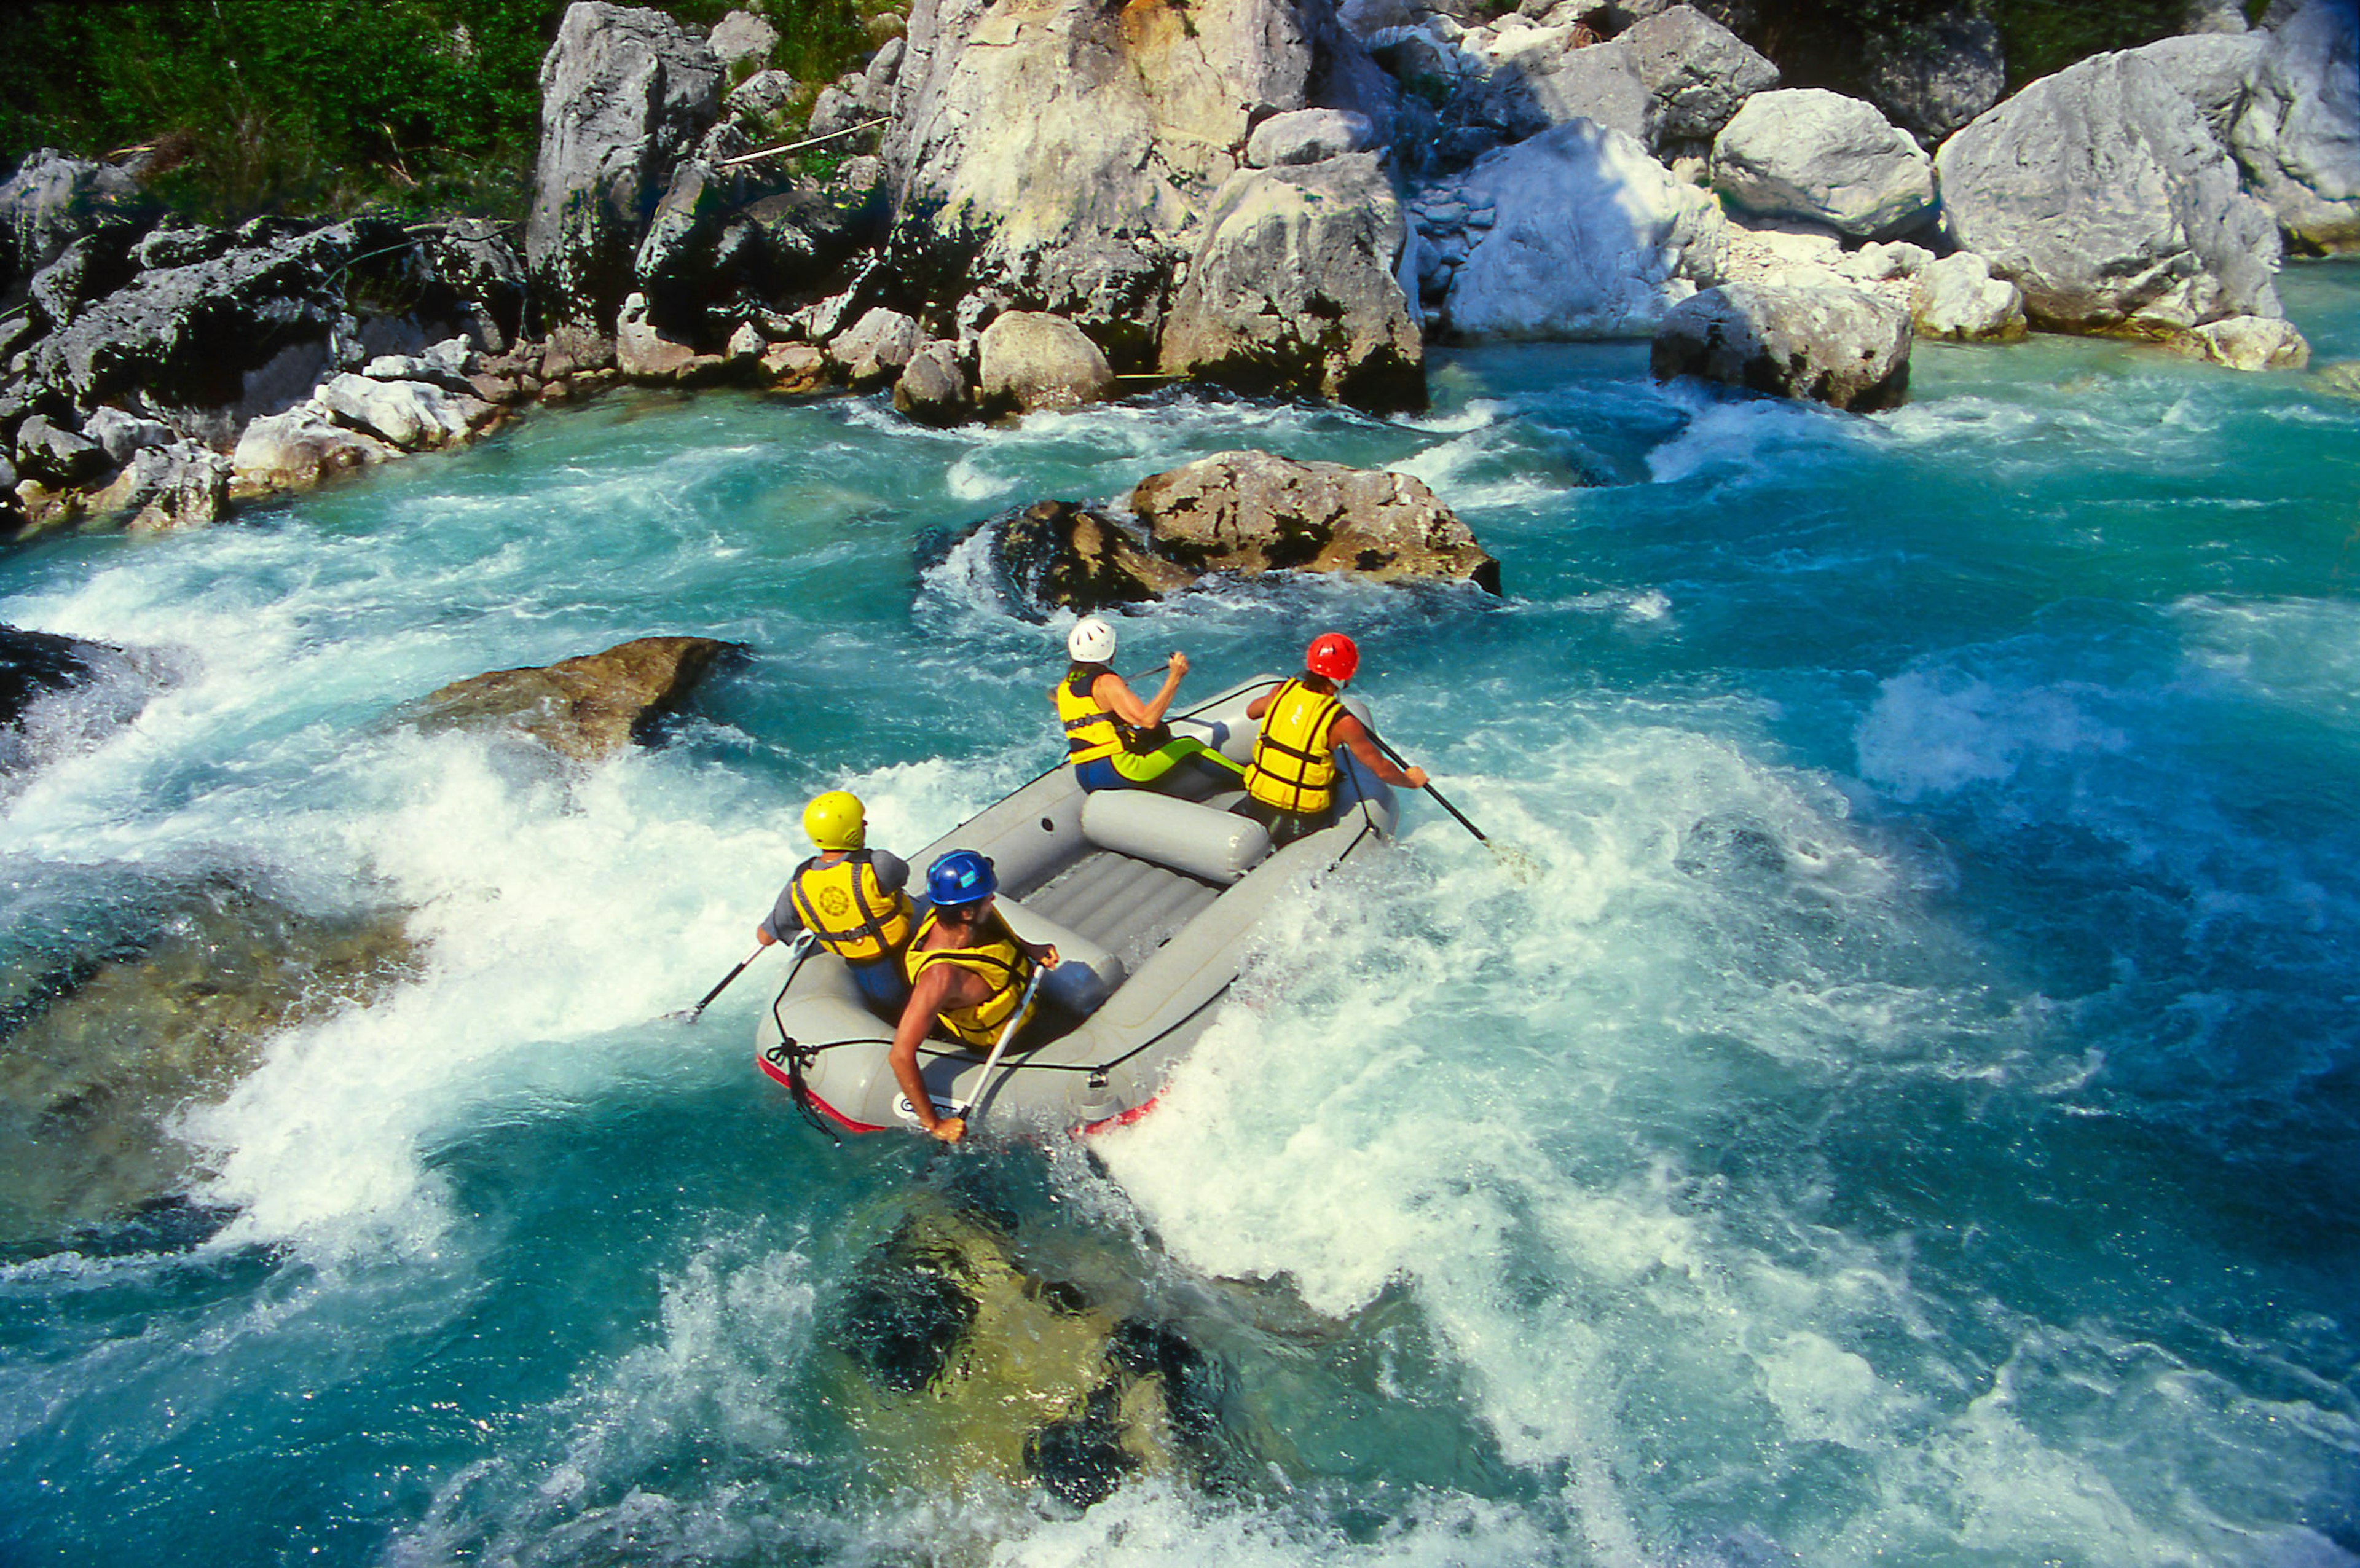 July 8, 1998: White water rafting on the rapids of the Soca River at Triglav National Park.